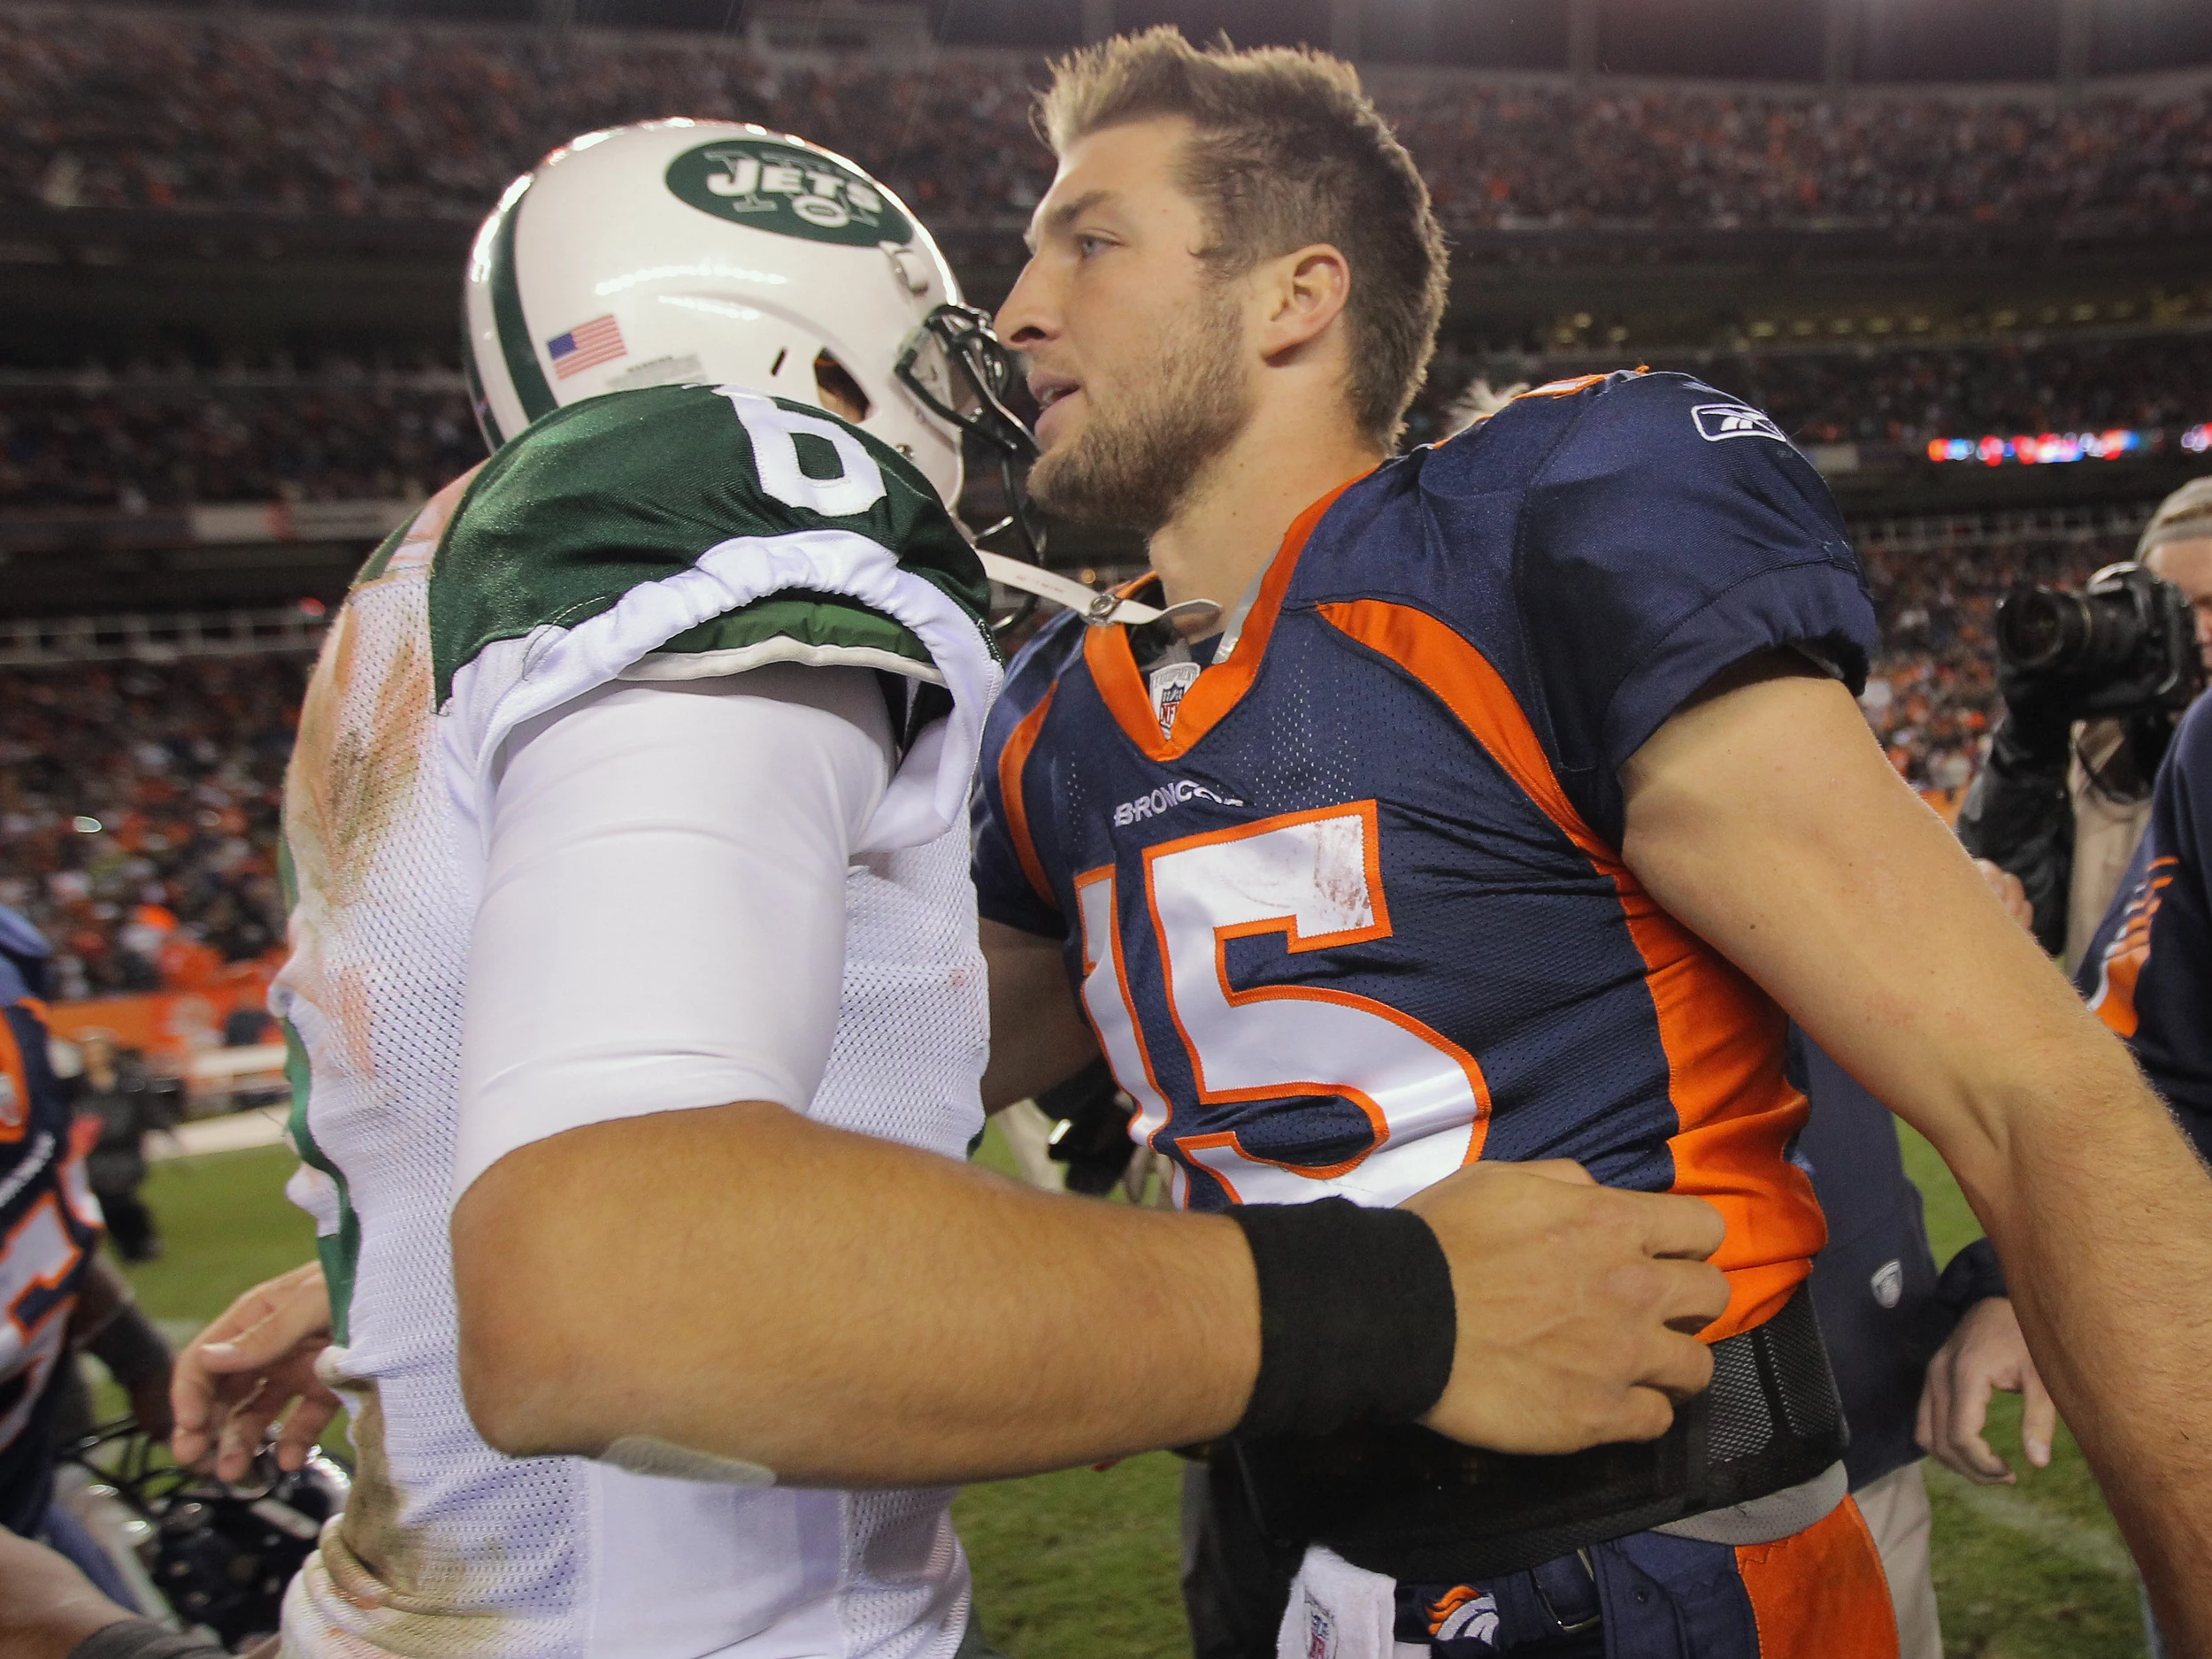 Tim Tebow to the New York Jets – It's All About the Press